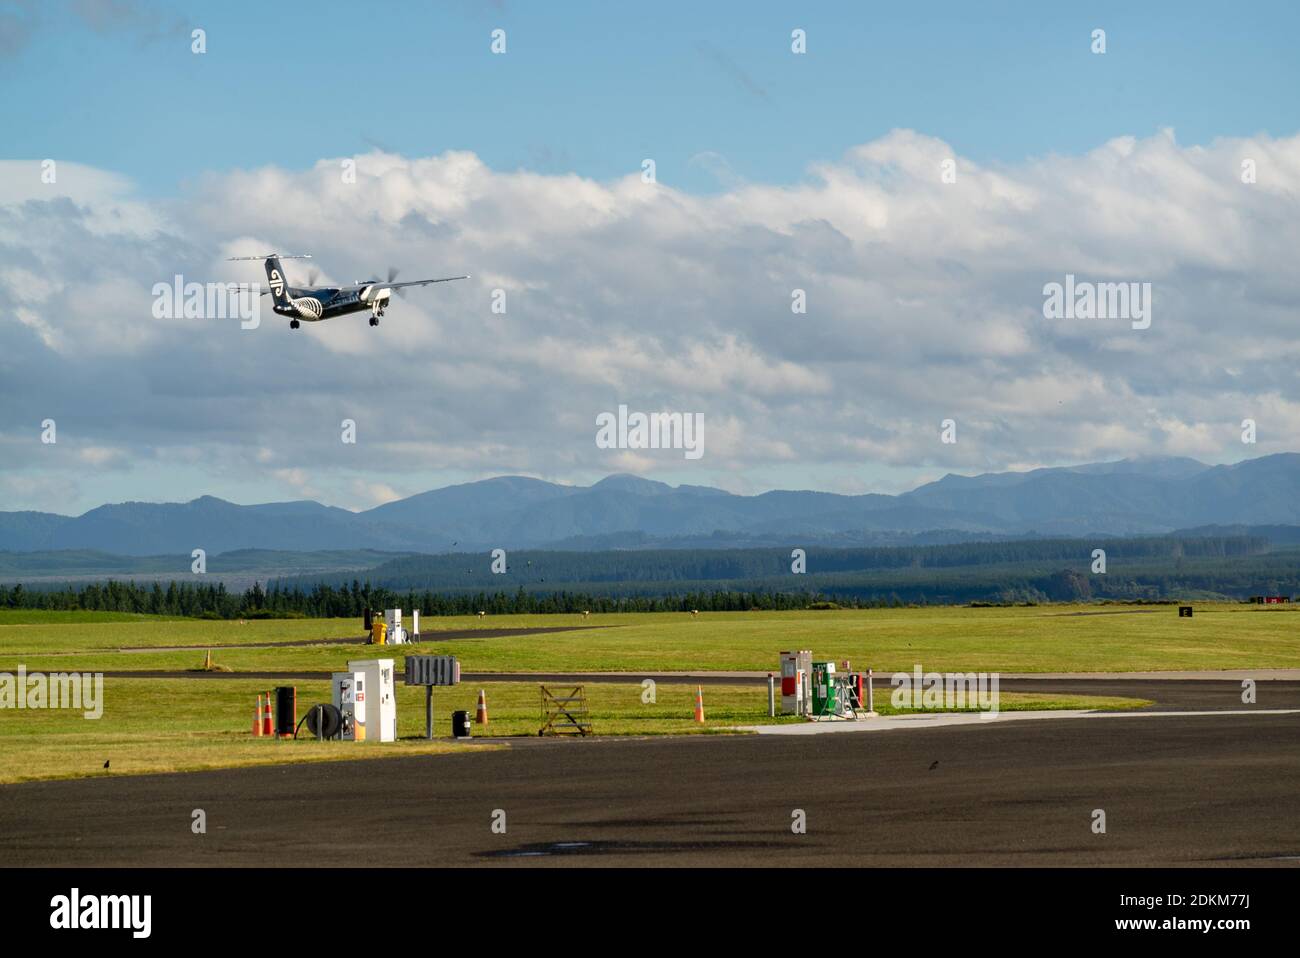 A Bombardier Dash 8 Q300 series painted in all black colors lifts off the runway in Taupo Airport, New Zealand Stock Photo